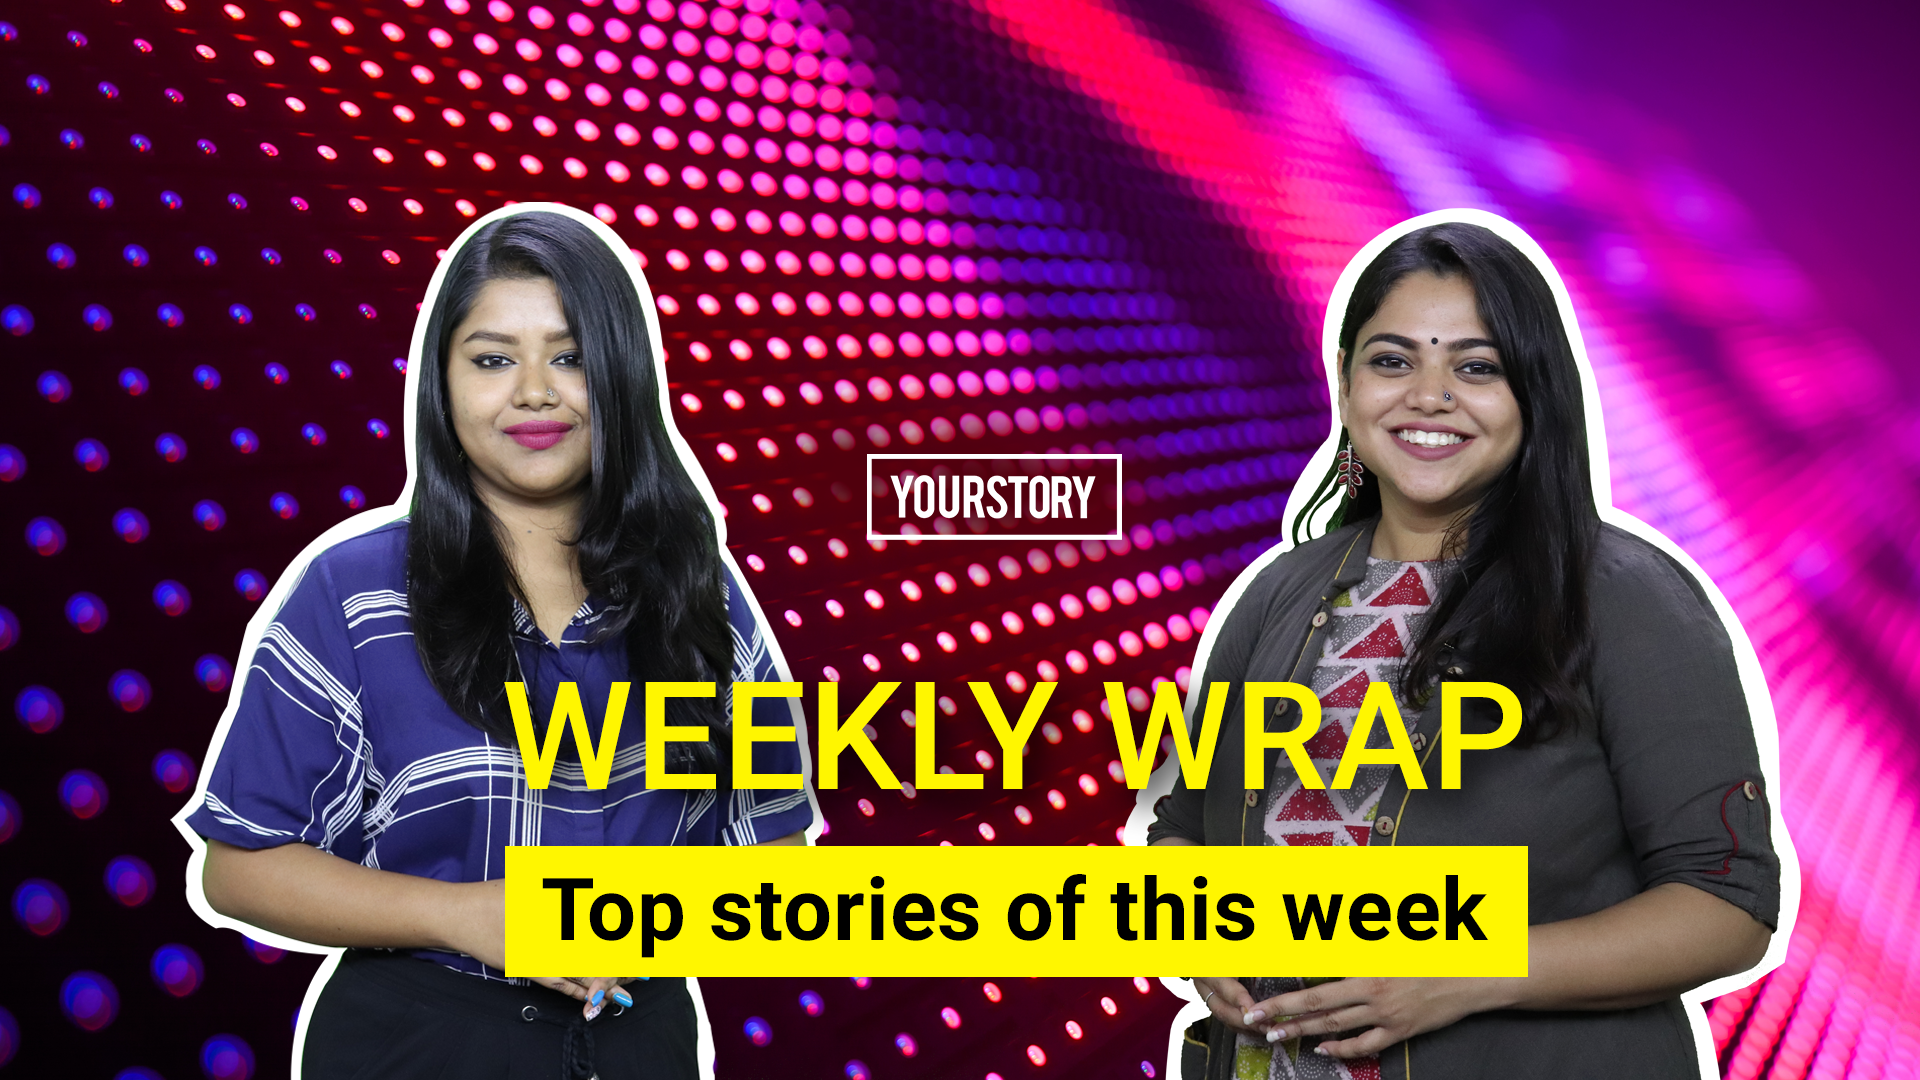 WATCH: The week that was - from Udaan’s journey to becoming a unicorn to Freshworks engineer who believes in getting the basics right